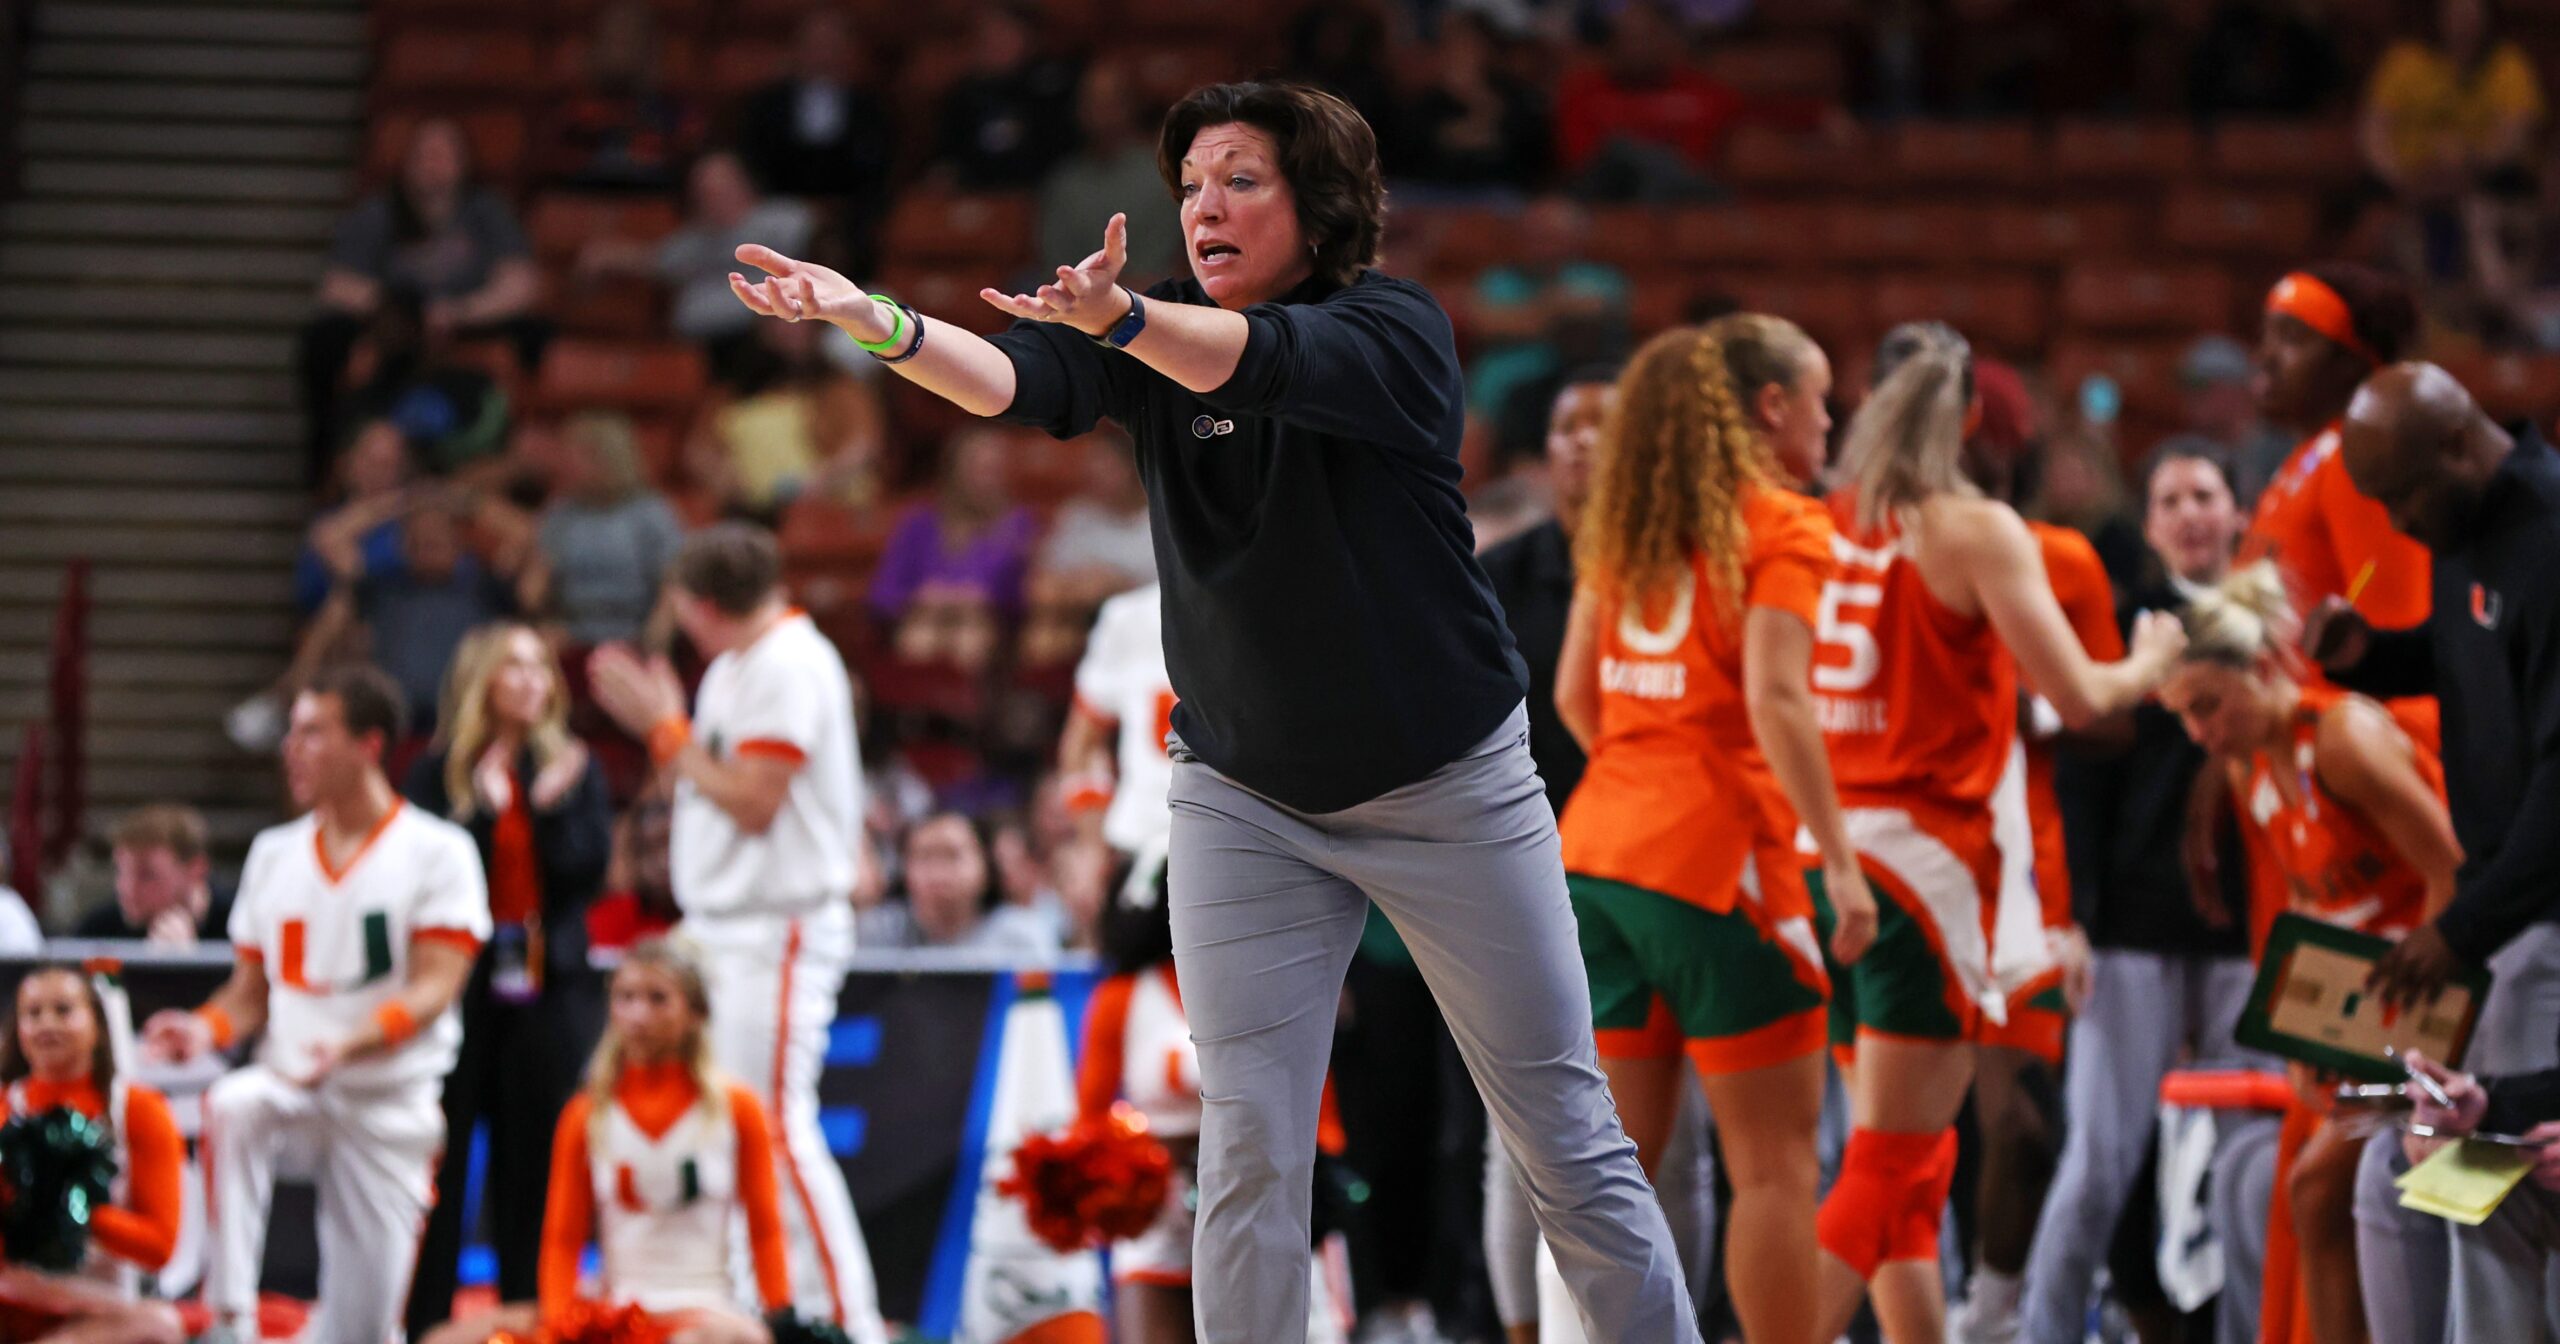 Team talk: Miami Hurricanes women’s basketball ready for LSU challenge – “We’re tough, too”